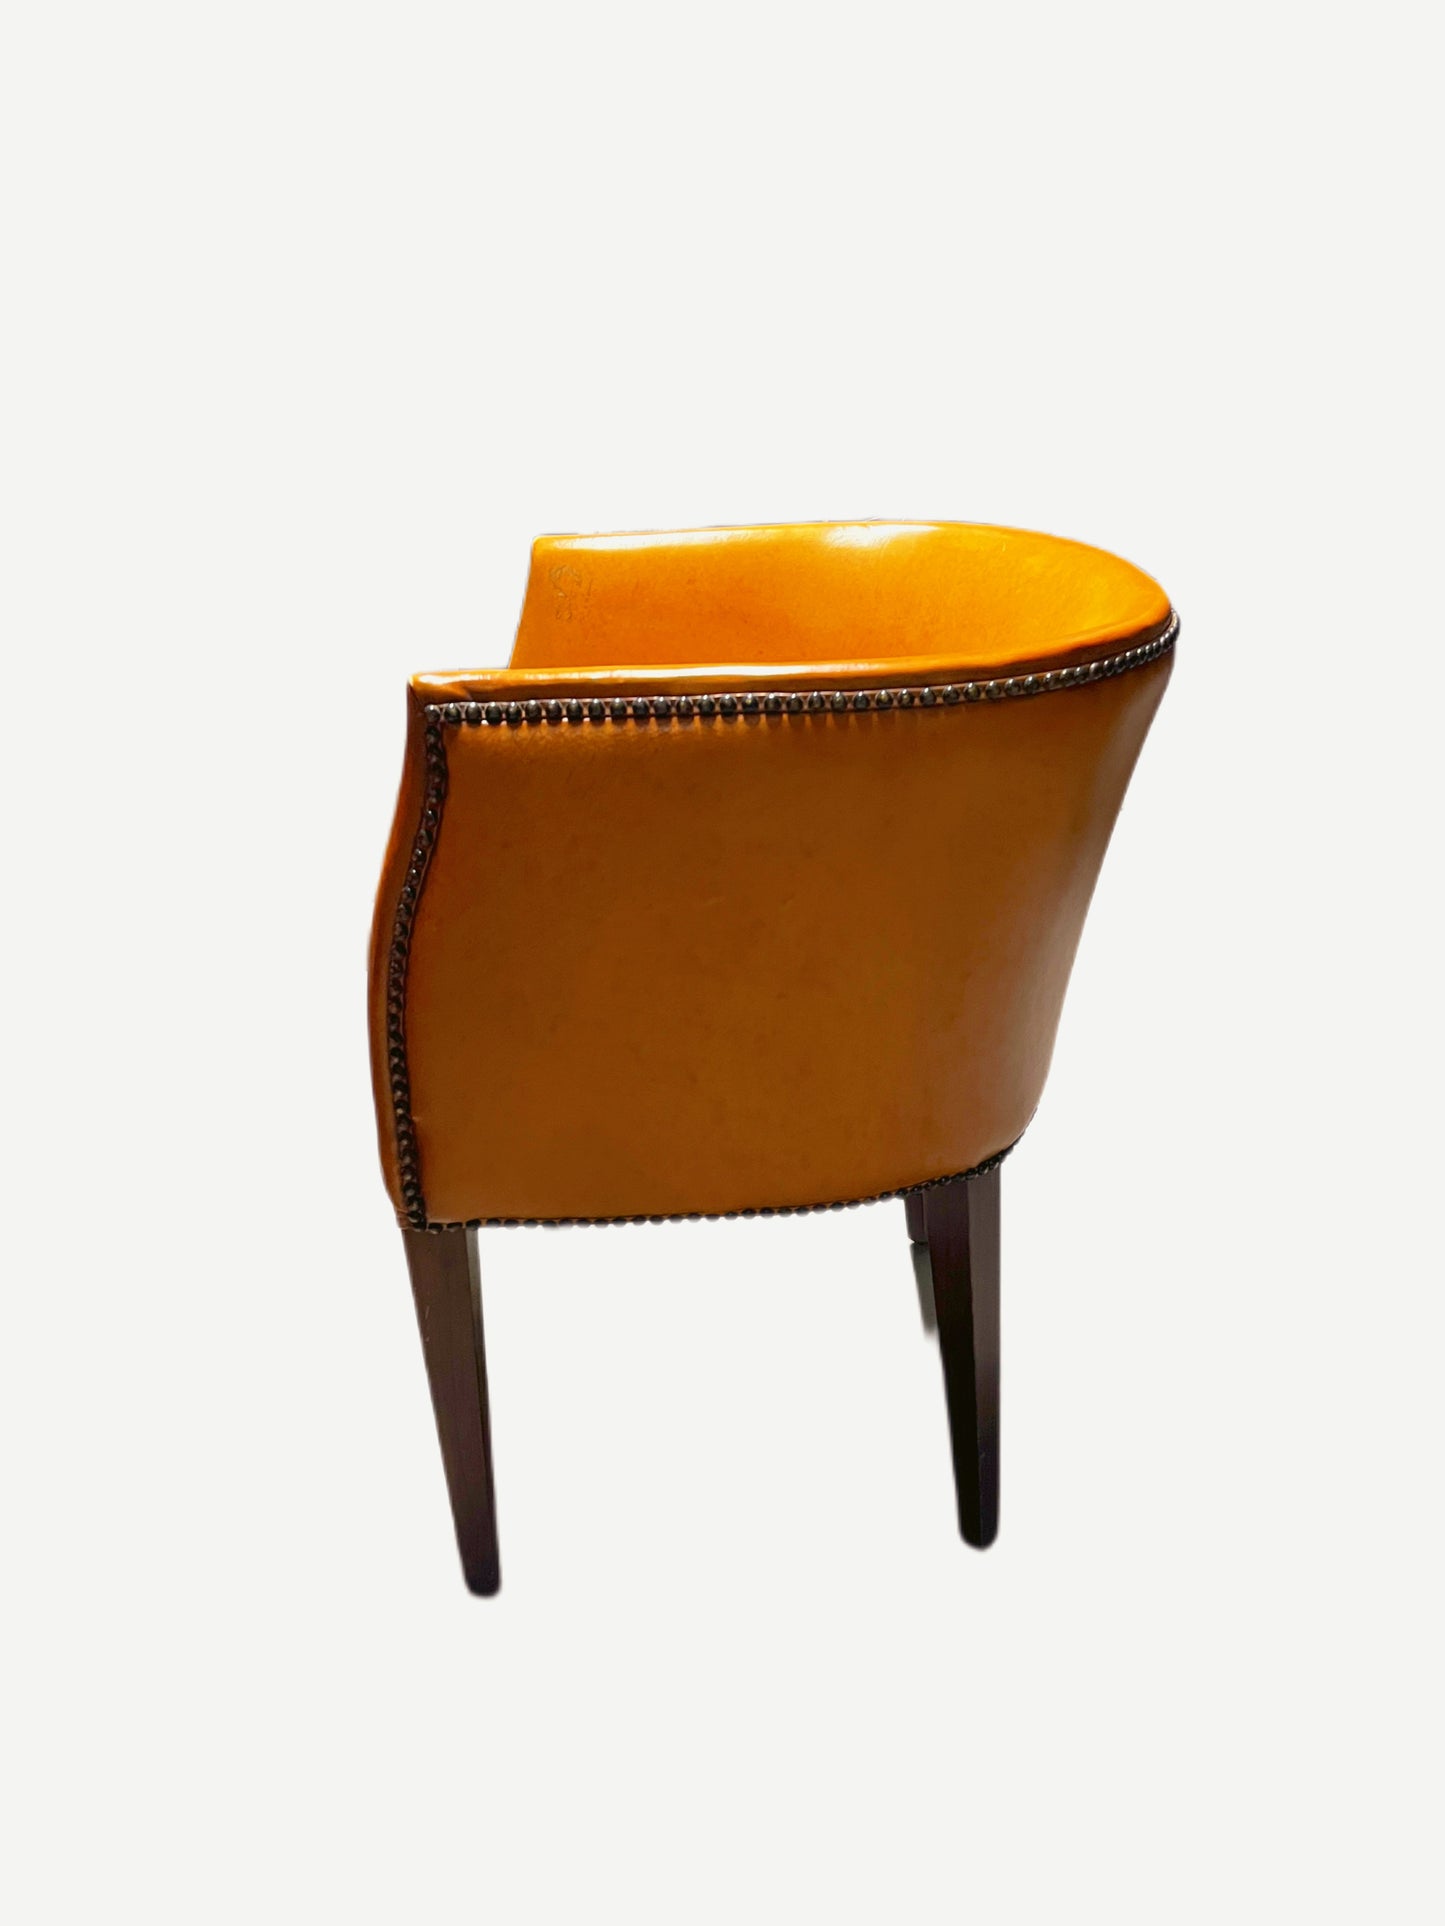 YELLOW ORANGE LEATHER CLUB CHAIR WITH RIVETS